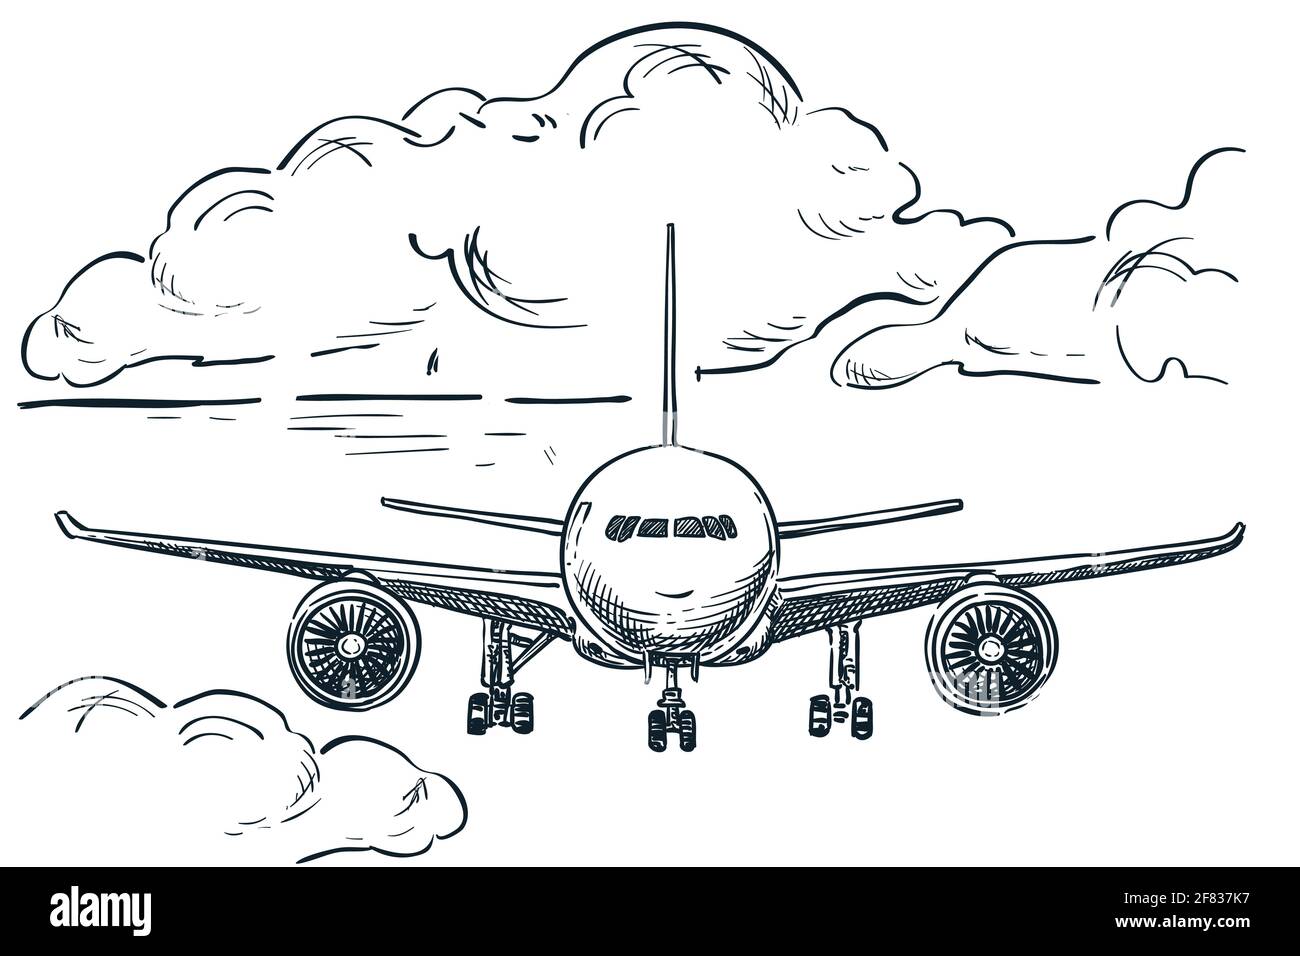 Premium Vector | Set of airplanes hand drawn icons the contours of the  aircraft in doodle style isolated on white background simple graphic drawing  decor for kids